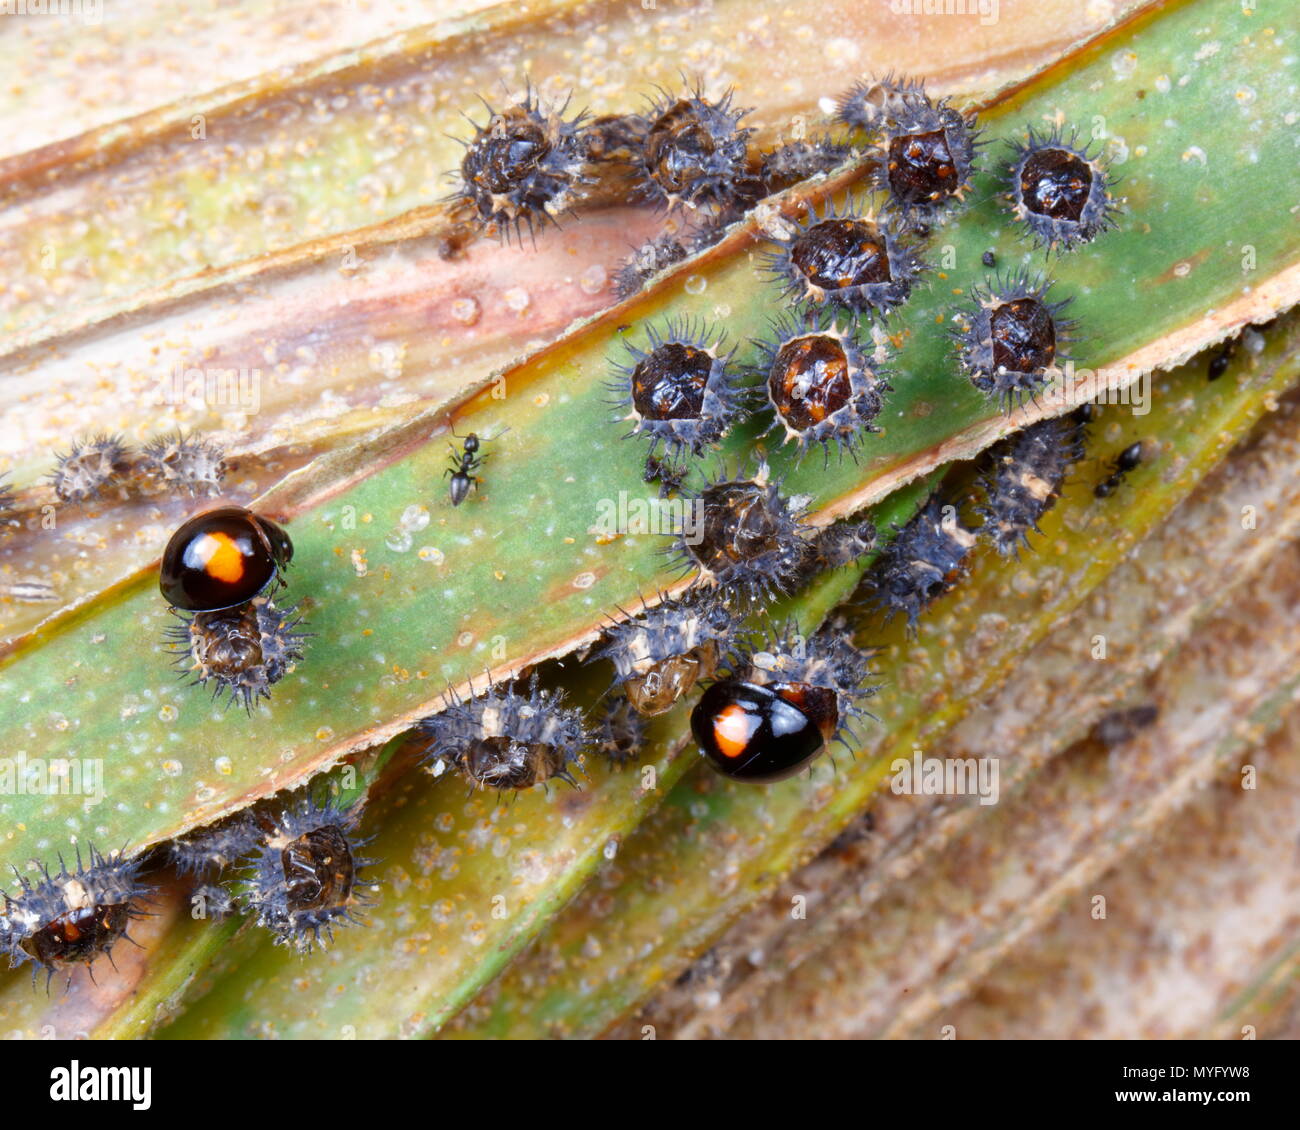 Twice-stabbed lady beetles, Chilocorus stigma, on a palm frond, emerging from pupae. Stock Photo